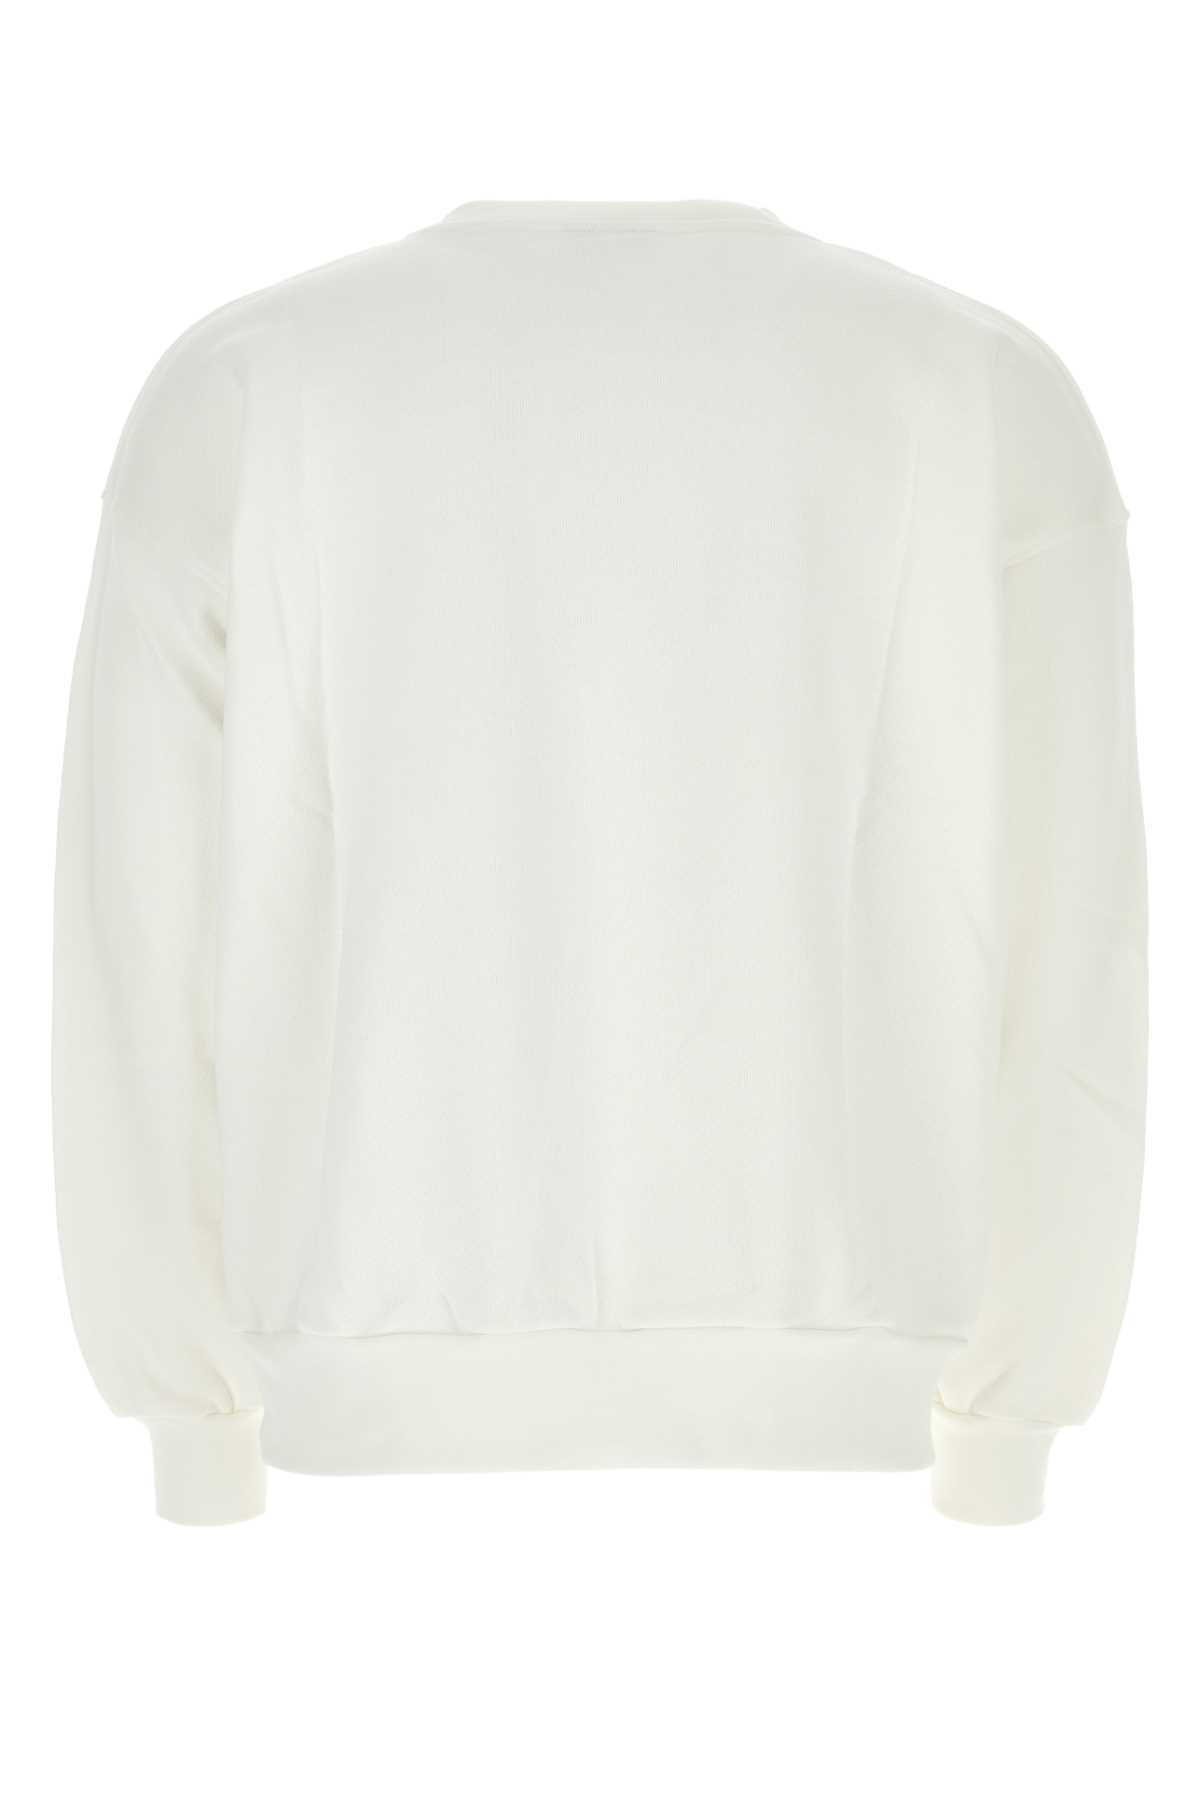 Botter White Cotton Sweatshirt In White Caribbean Couture Embr